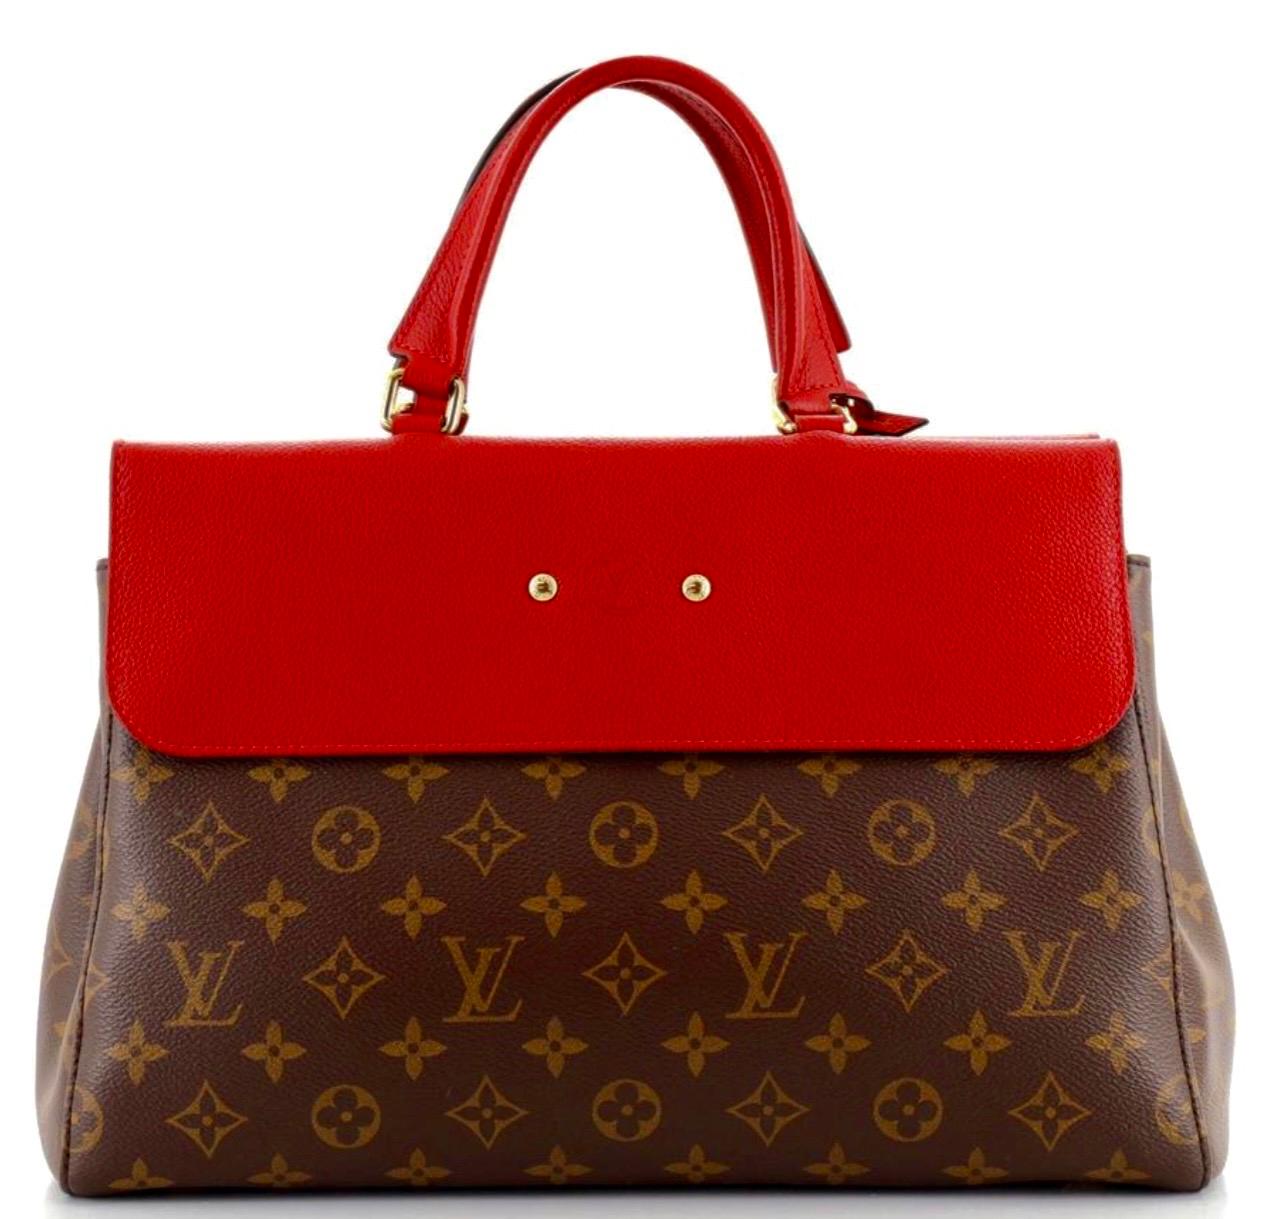 A chic combination of Monogram canvas and colored calf leather. This tote is just as much functional as it is luxurious,
Code SR 1166
Code 4202.22.4040
Two outer pockets under the Red calf leather 
when you open the bag 
it has one center zippered